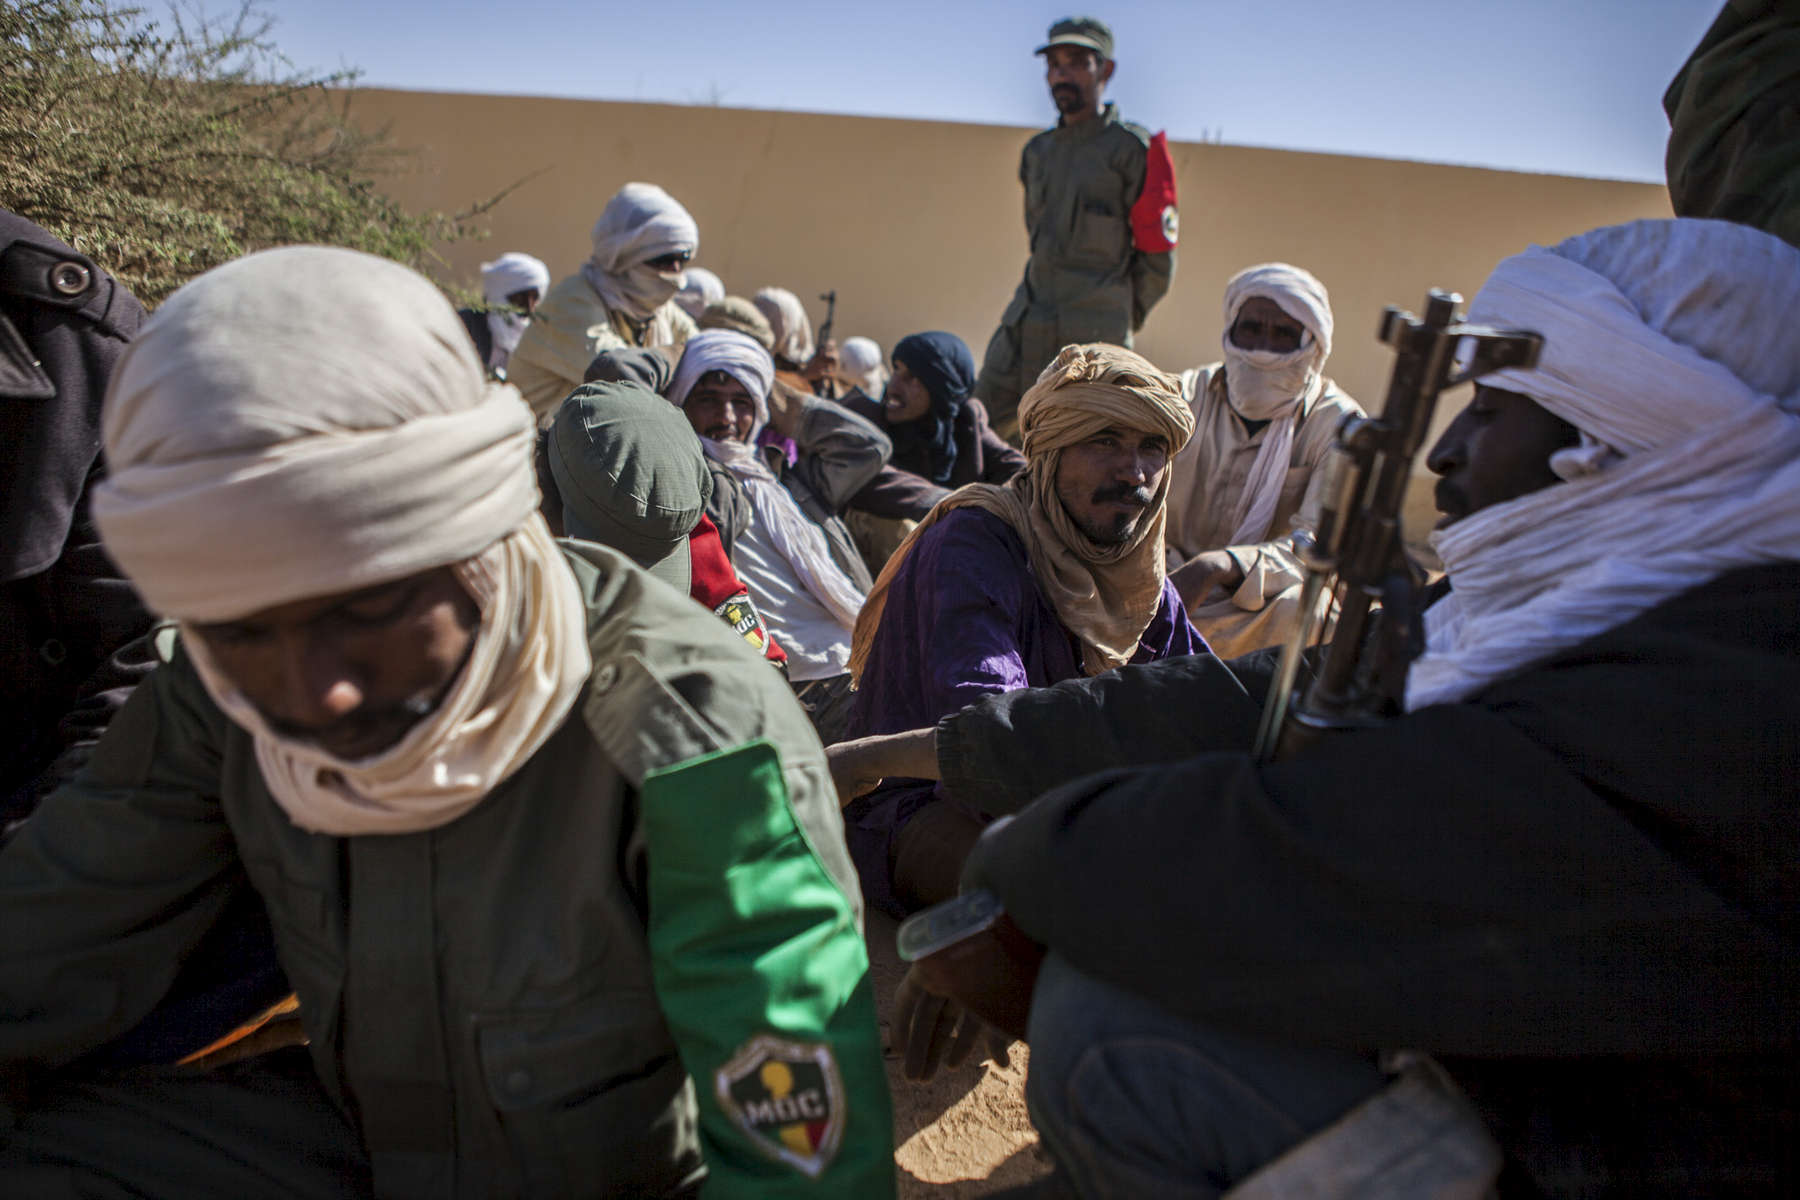 Members of former rebel groups part of the peace process wait to be registered in the MOC at a local police station in Gao, Mali on Friday, January 13, 2017. Close to 150 men wait to be registered in the MOC (Mécanisme Opérationnel de Coordination) but the process has been delayed due to the number of men exceeding the original amount registered as well as demands of insurance and pay by the men. The MOC will be comprised of the Malian military as well as former members of rebel groups who are a part of the peace agreement. Joint patrols will take place in Gao, Timbuktu and Kidal with Gao being the first city to implement these patrols, the first steps in accomplishing the peace process. 